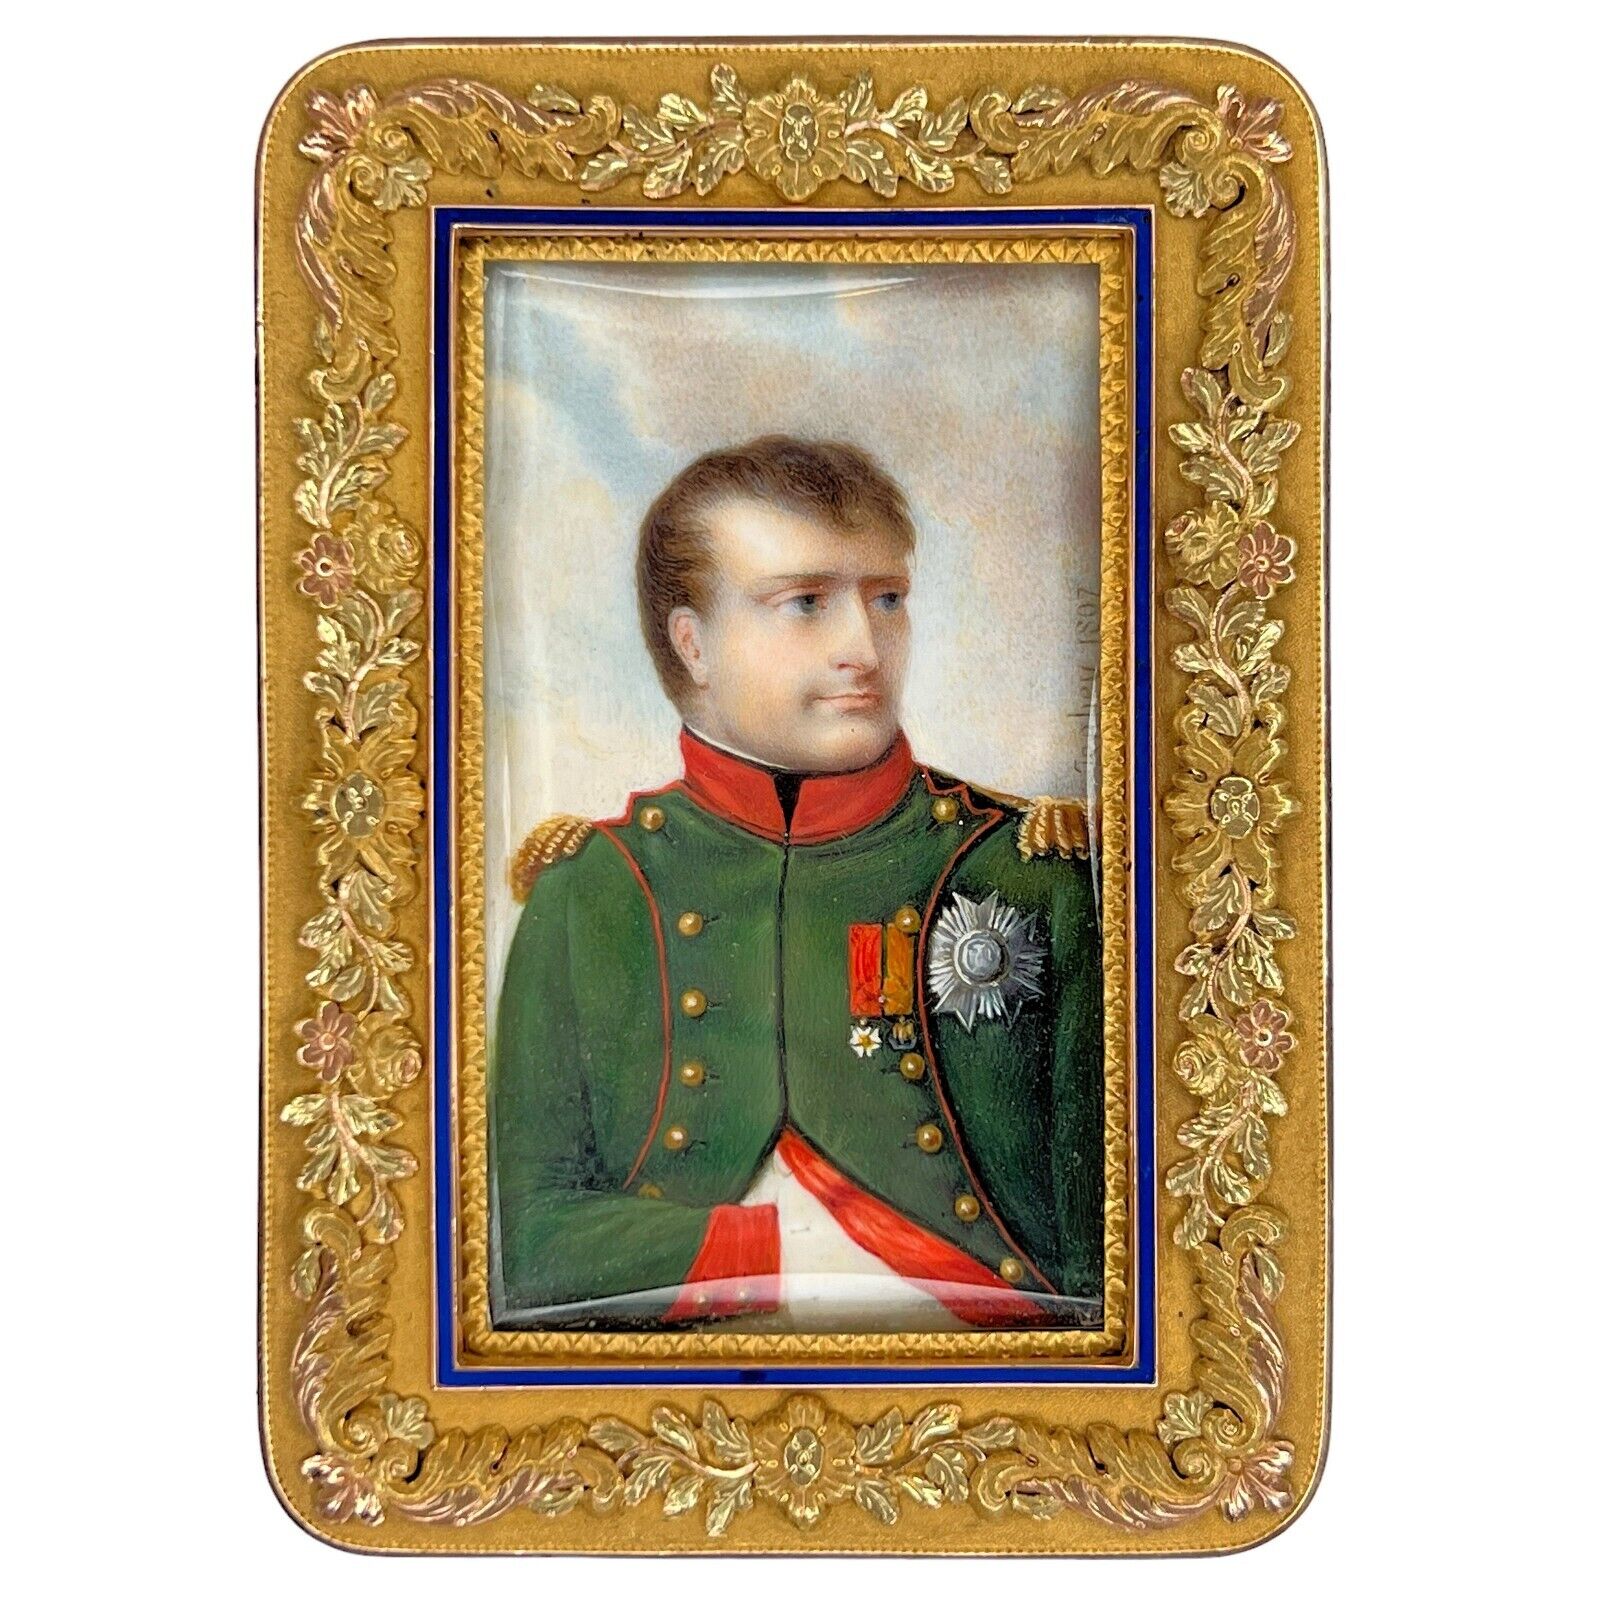 Gold Snuff Box with Napoleon Portrait by Jean-Baptiste Isabey (1767–1855)